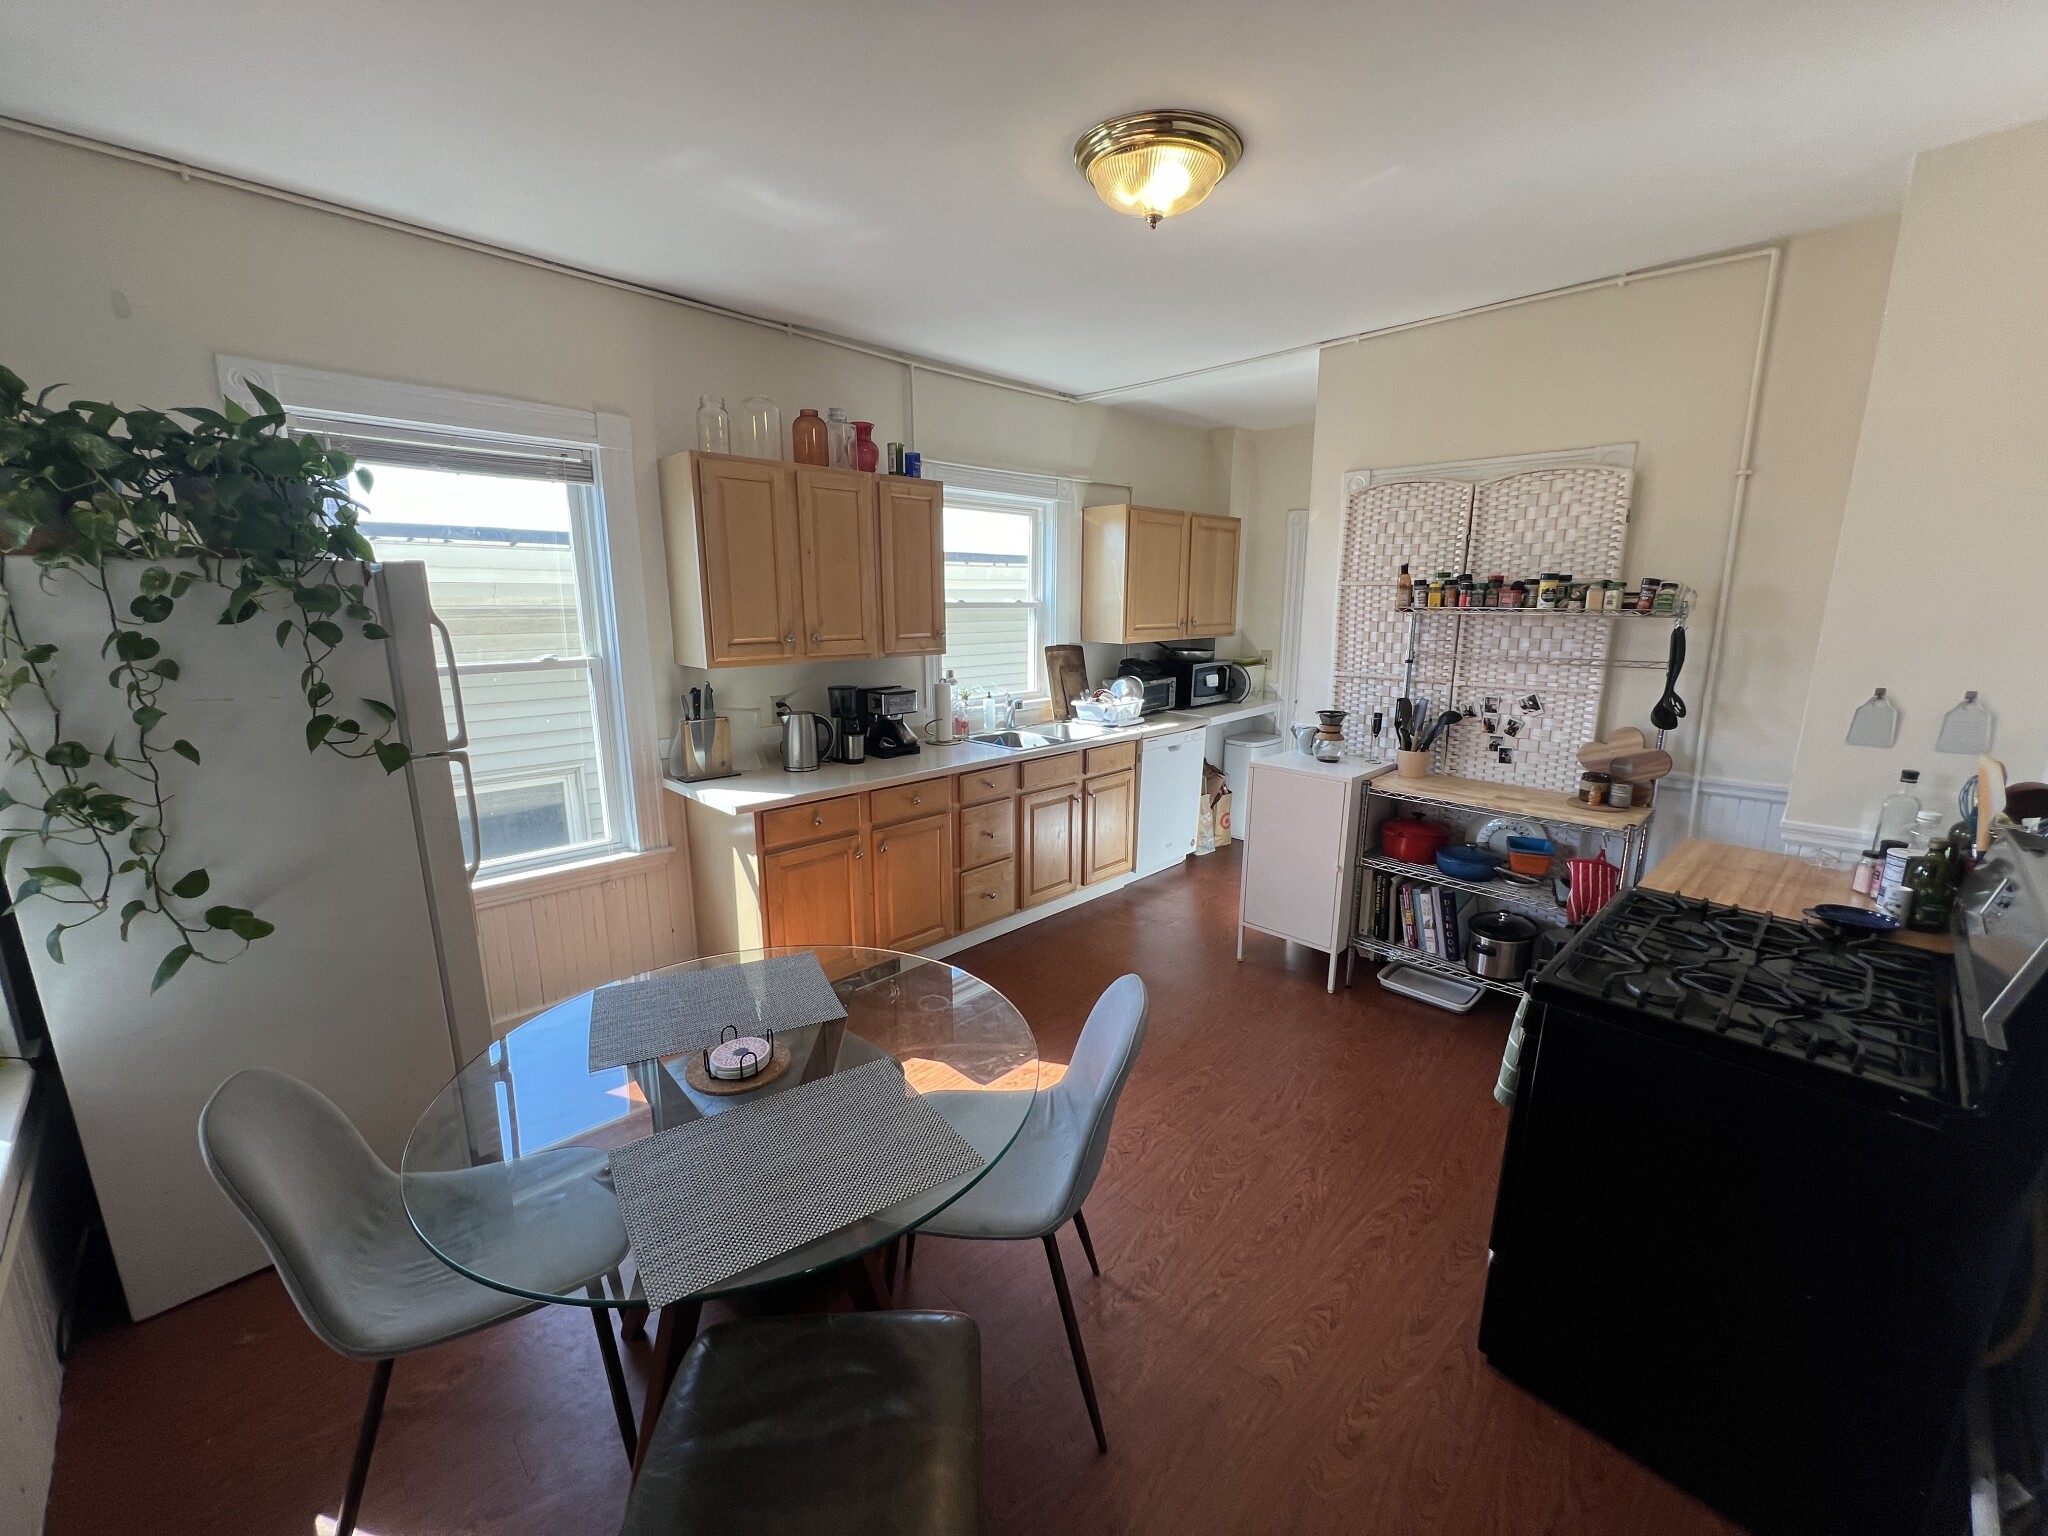 Photos of apartment on Granite St (s),Somerville MA 02143